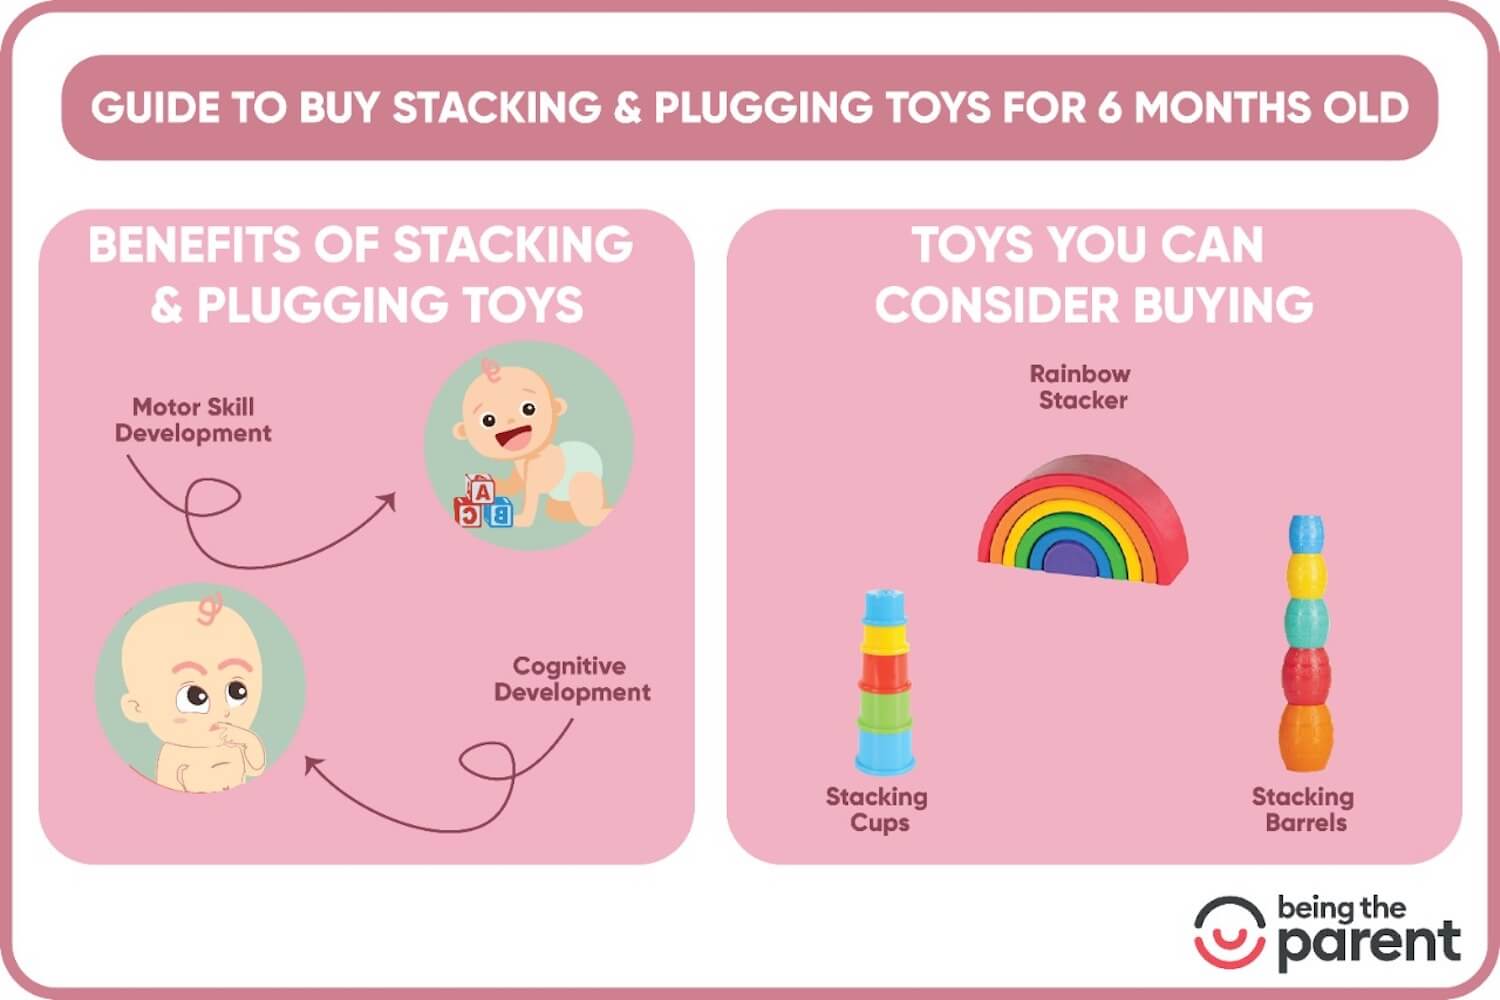 staking and plugging toys for 6 month old